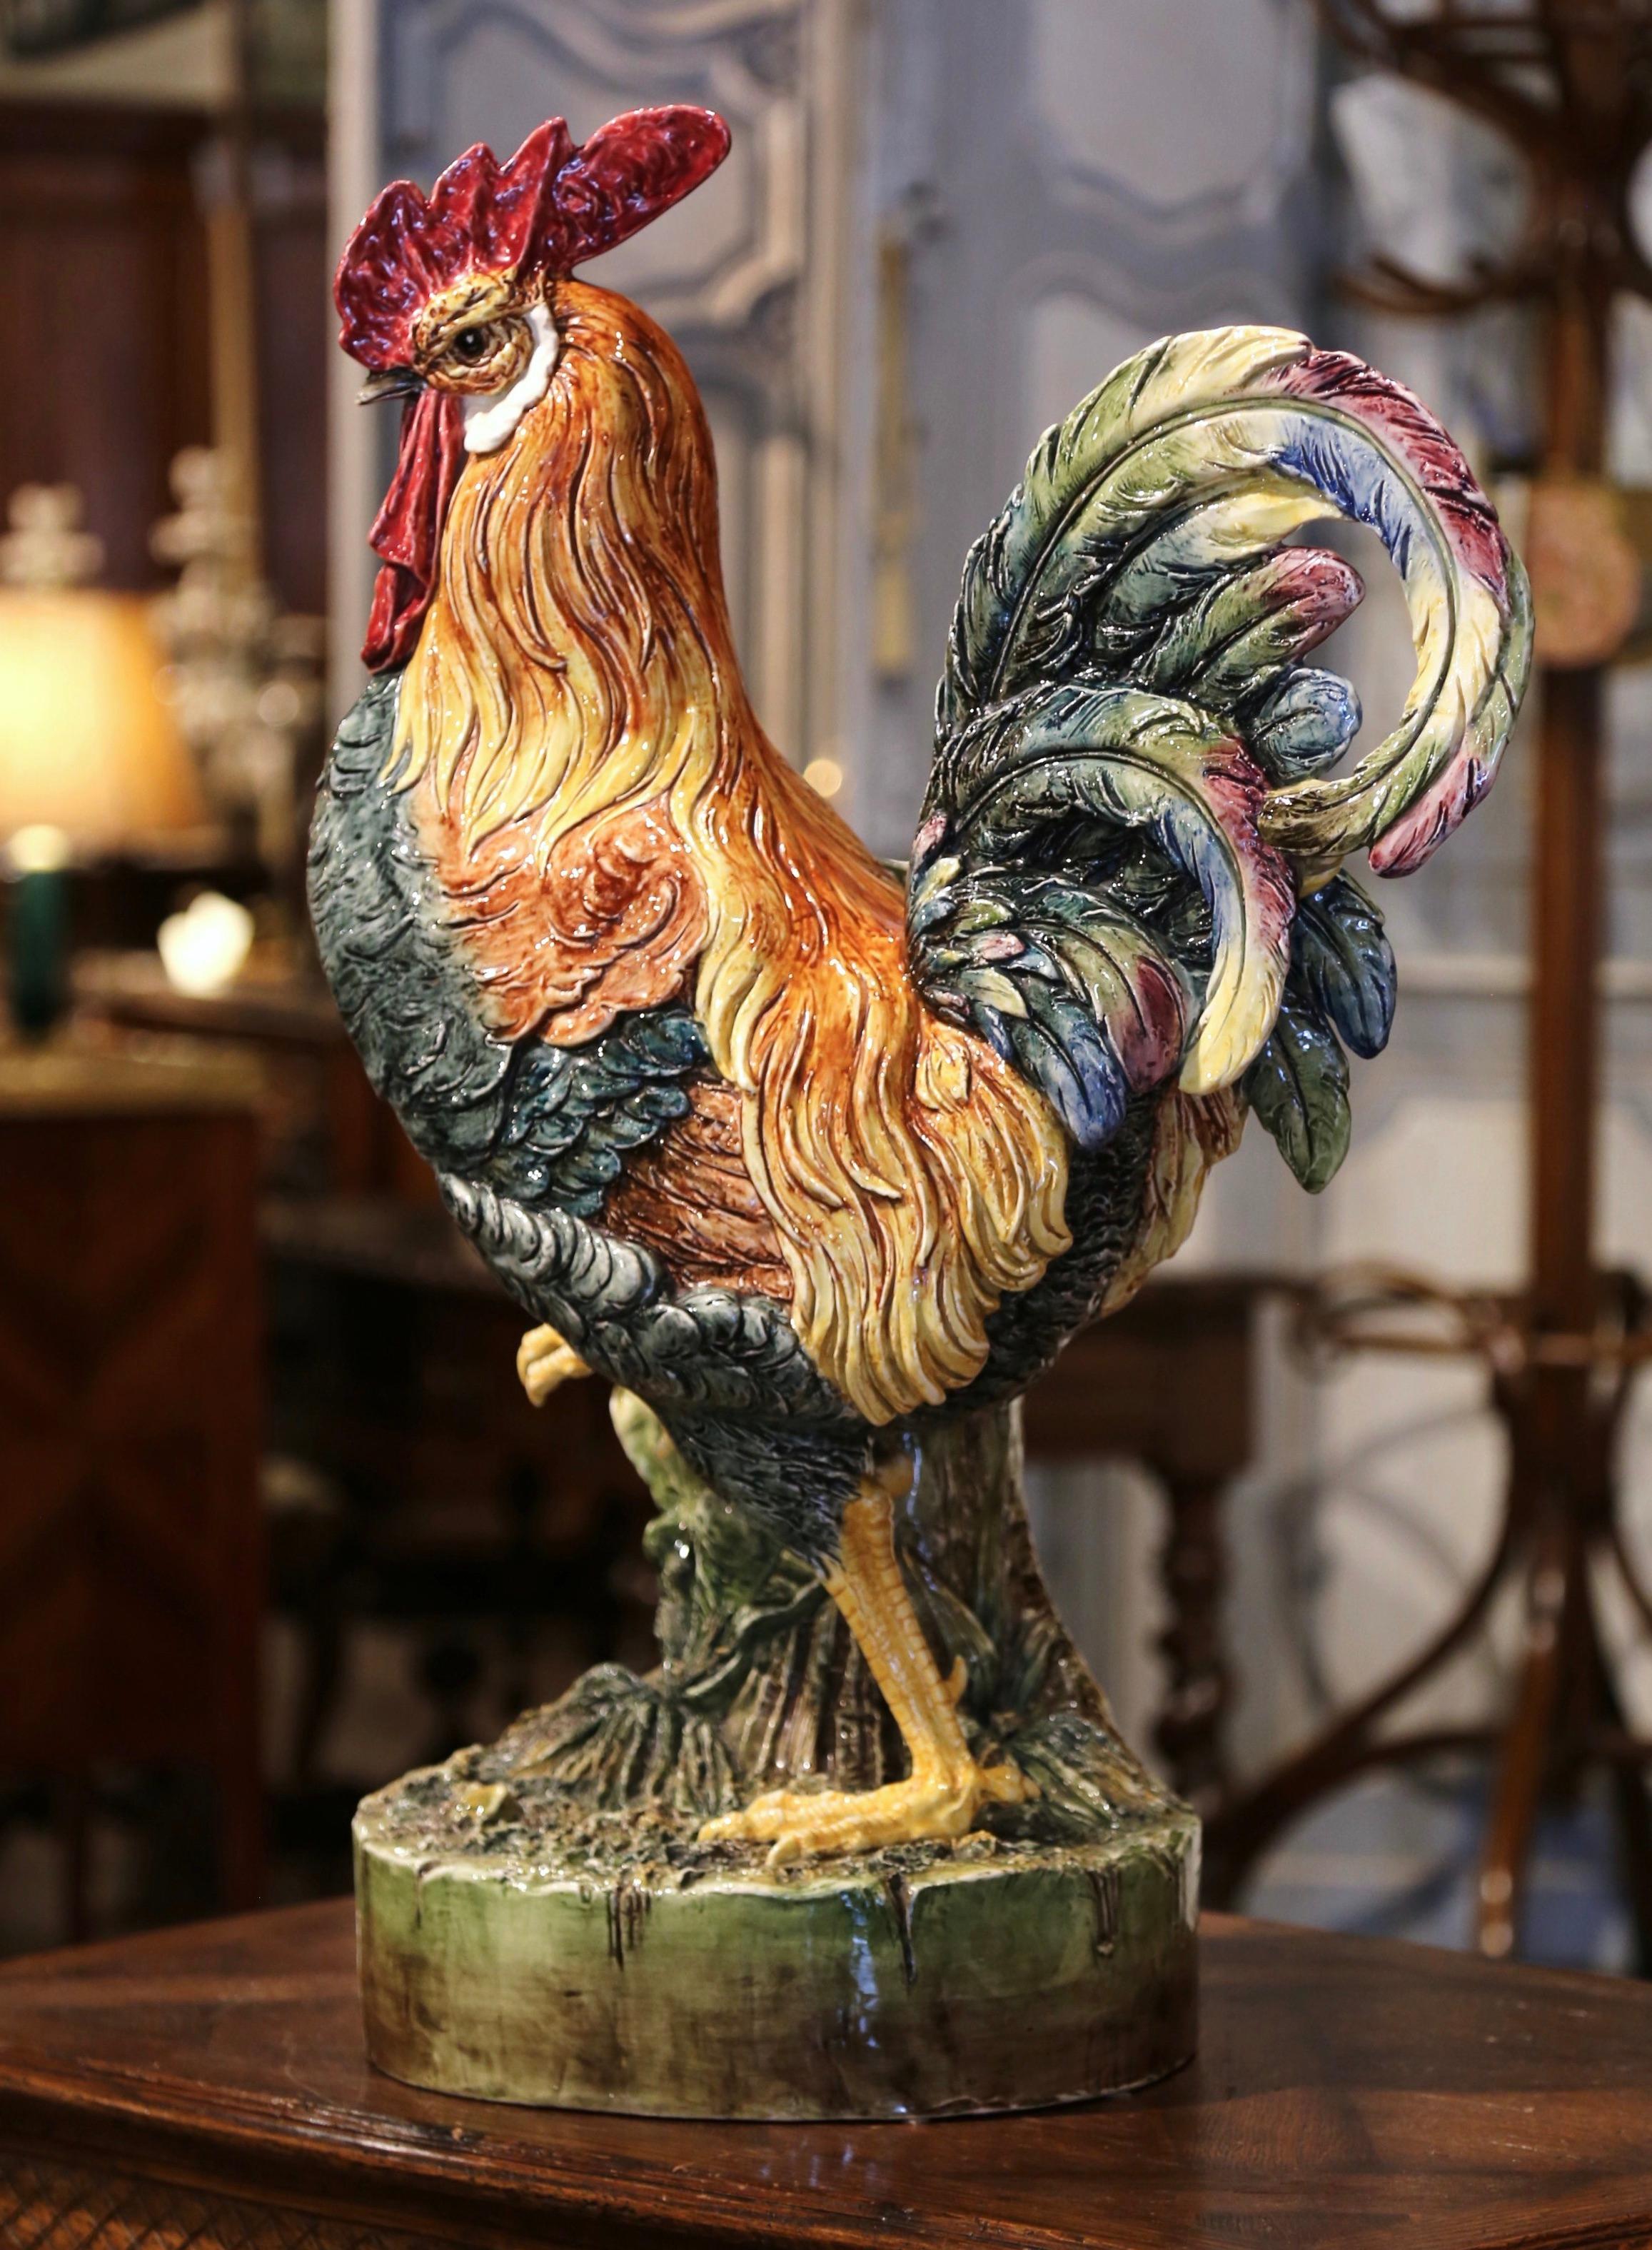 Bring the country French style into your kitchen with this important antique rooster sculpture. Crafted in France circa 1890, and attributed to the Massier brothers, the tall faience chicken figure is a Classic French country home accessory. The